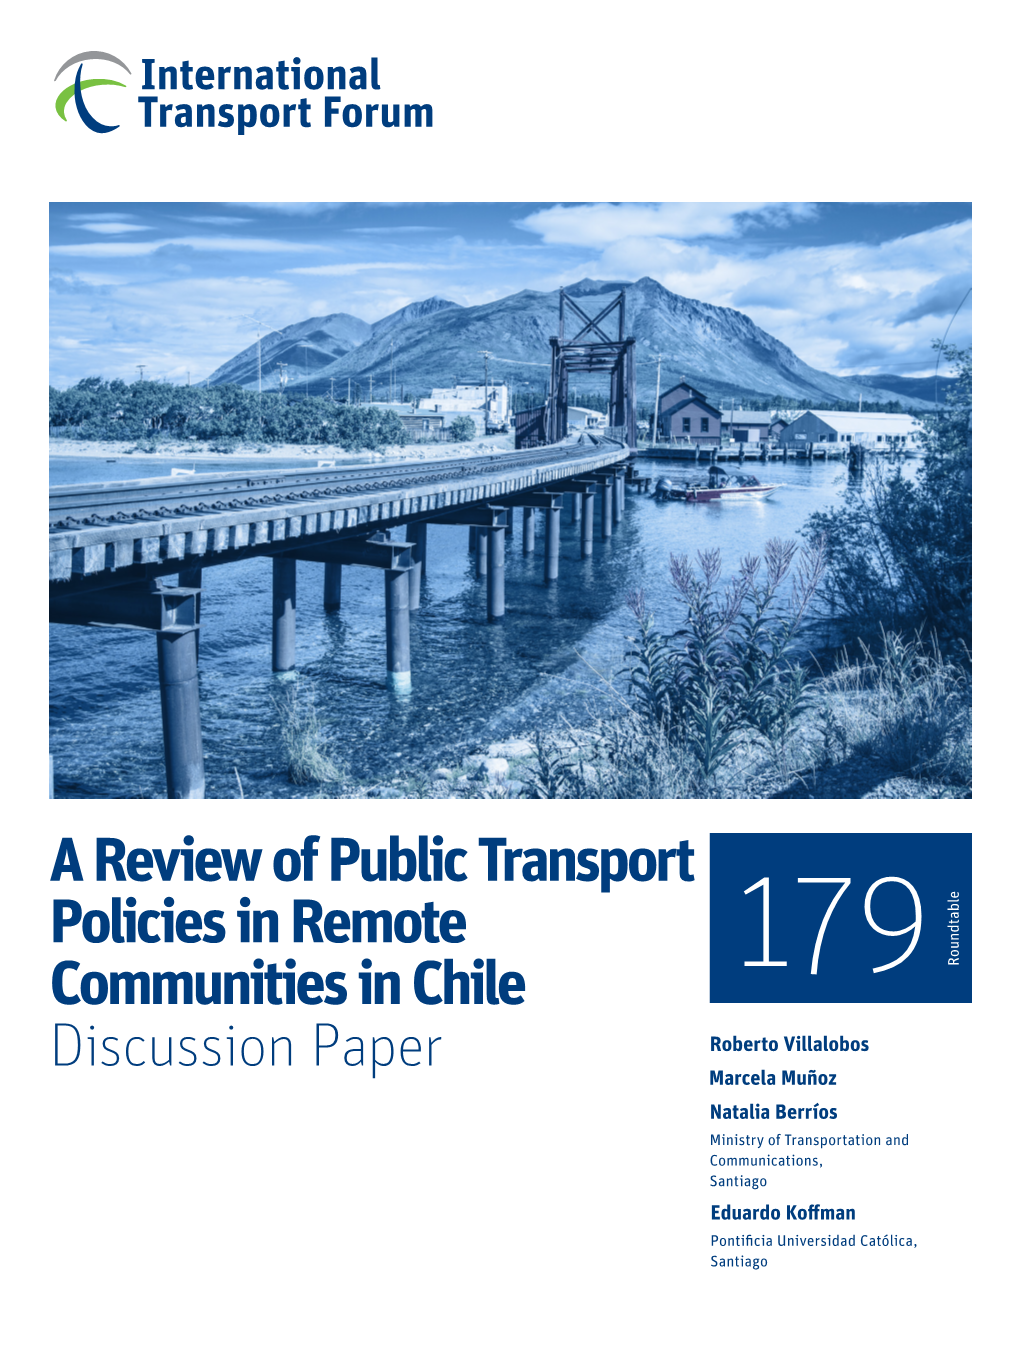 A Review of Public Transport Policies in Remote Communities in Chile